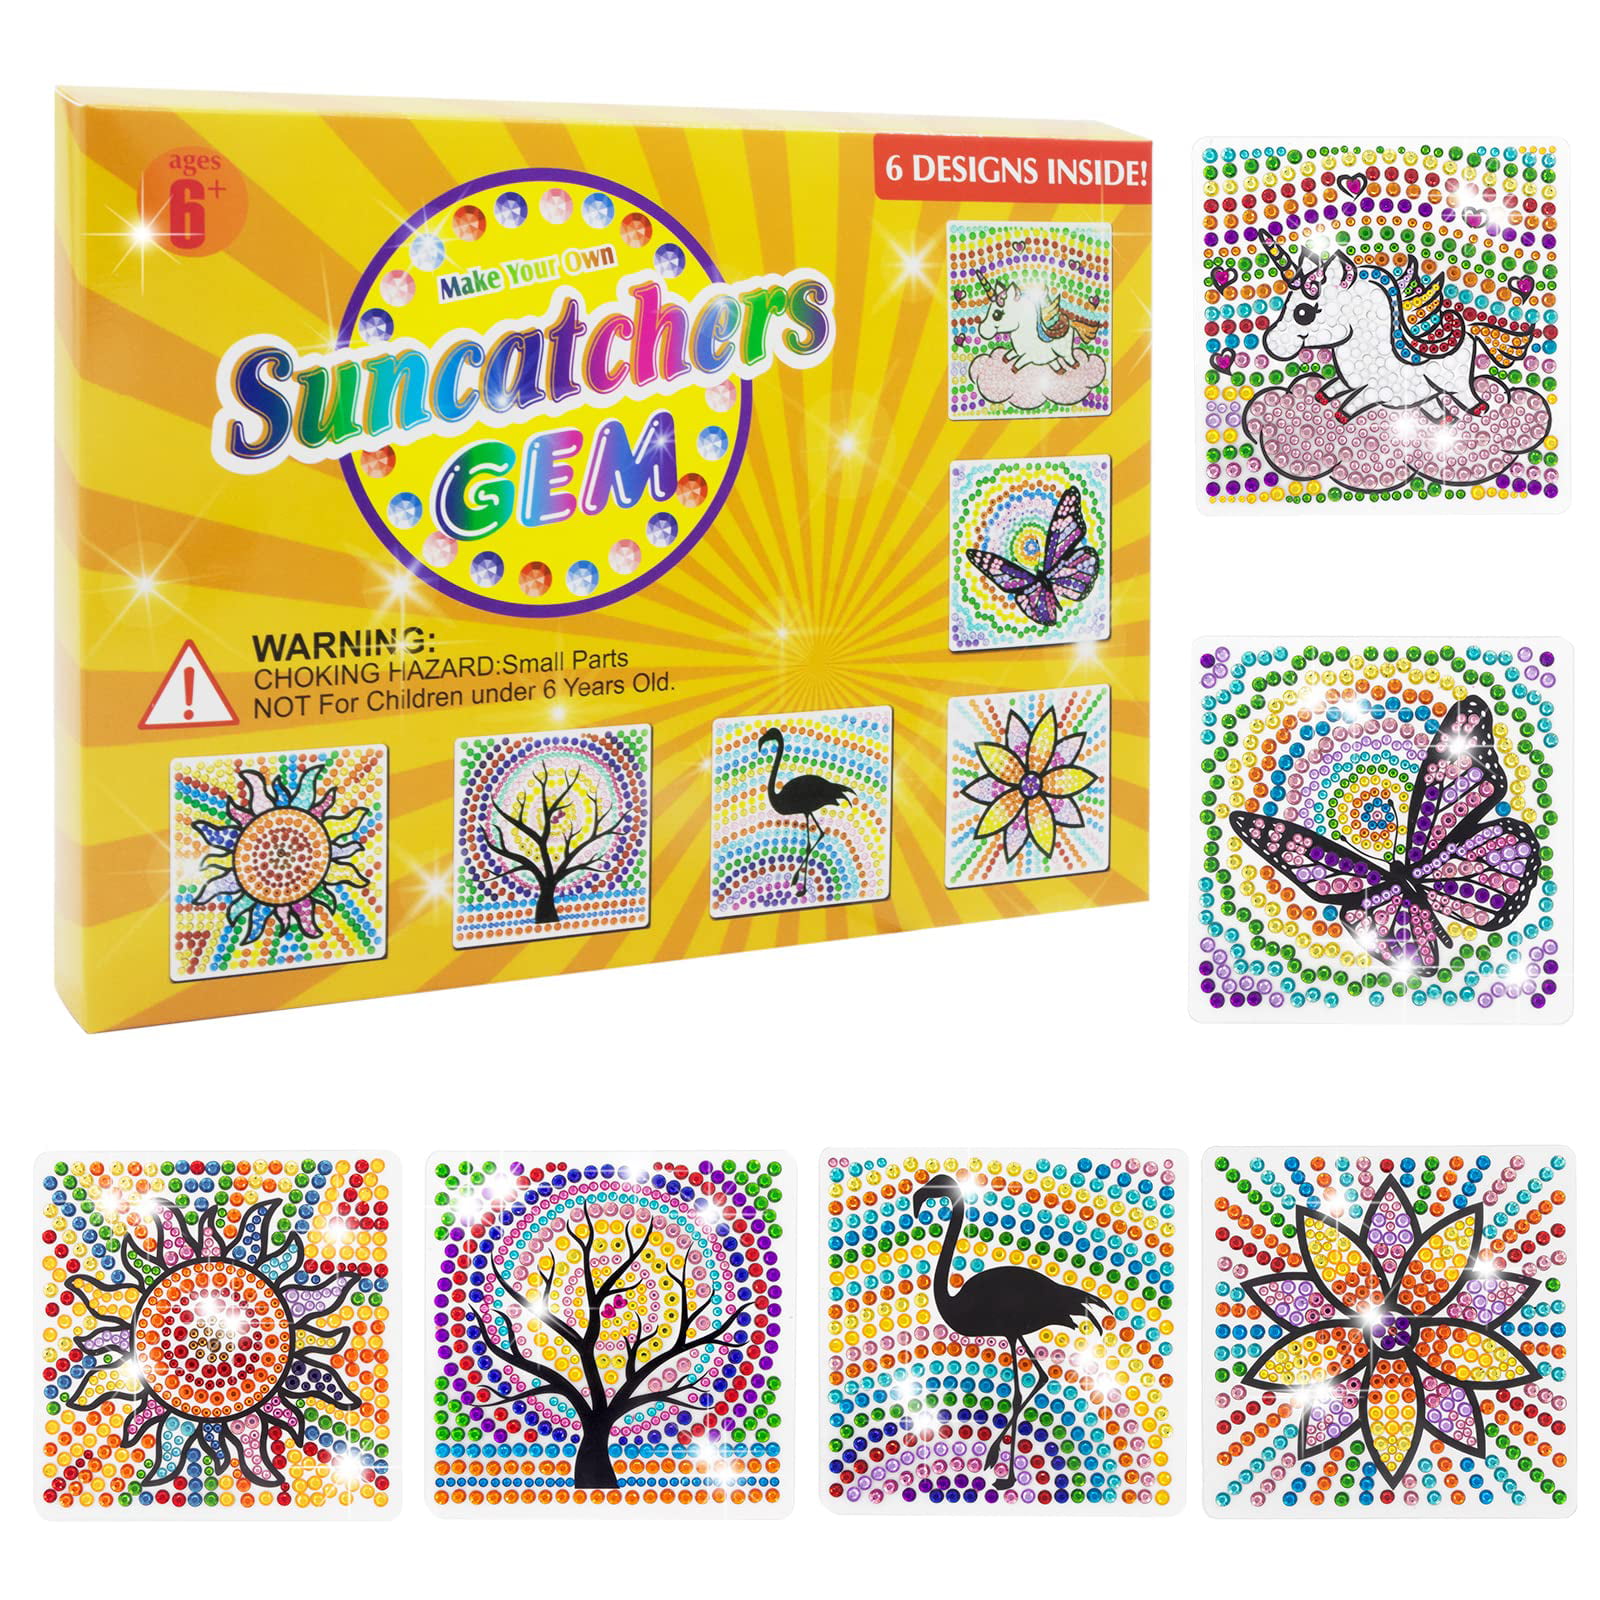  PanLynner Arts and Crafts for Girls, 15pcs Suncatchers Gem  Keychains, Mosaic Diamond Painting Kits for Kids Ages 4-6-8-10-12, Paint by  Number Accessories, Toys and Gifts for Children (Easter Egg Set) 